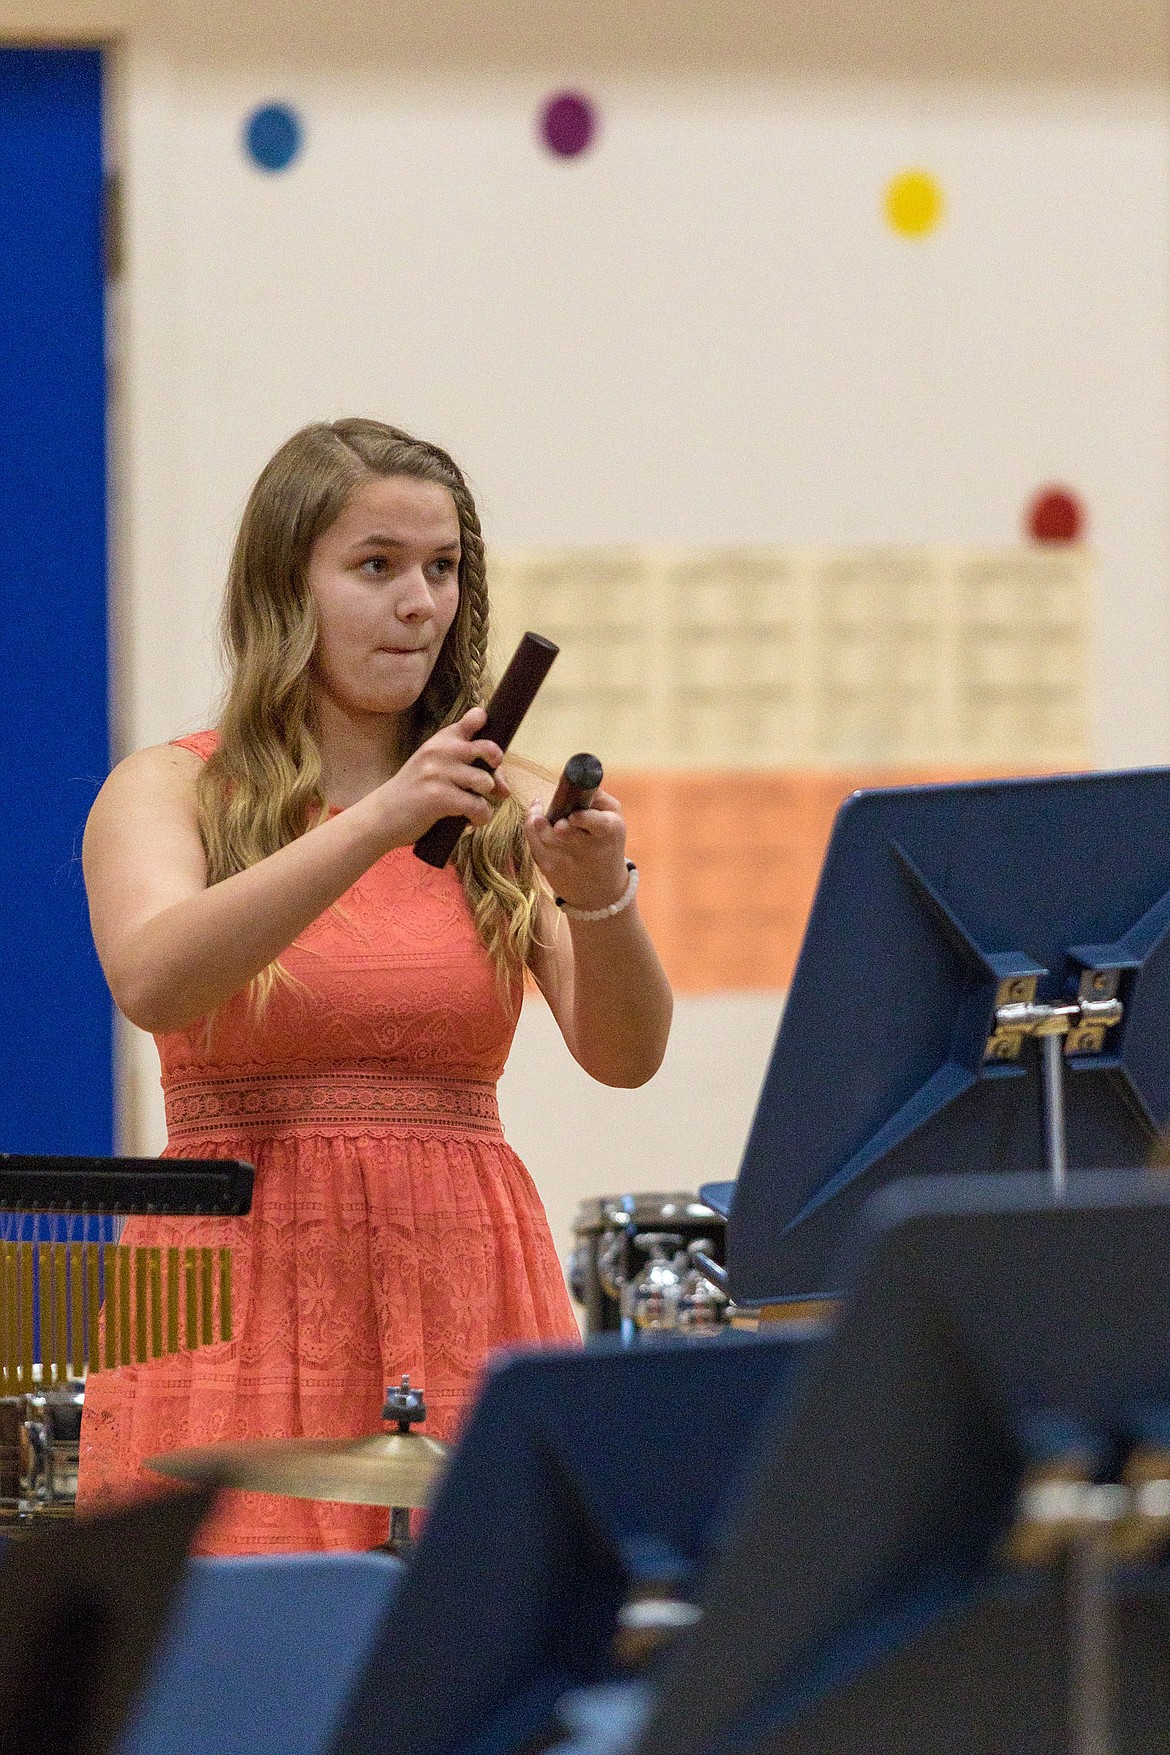 Percussionist Josslyn Hoover, a Libby seventh-grade student, performs during a concert in the Libby Elementary School gym on Tuesday, March 27, 2018. (John Blodgett/The Western News)